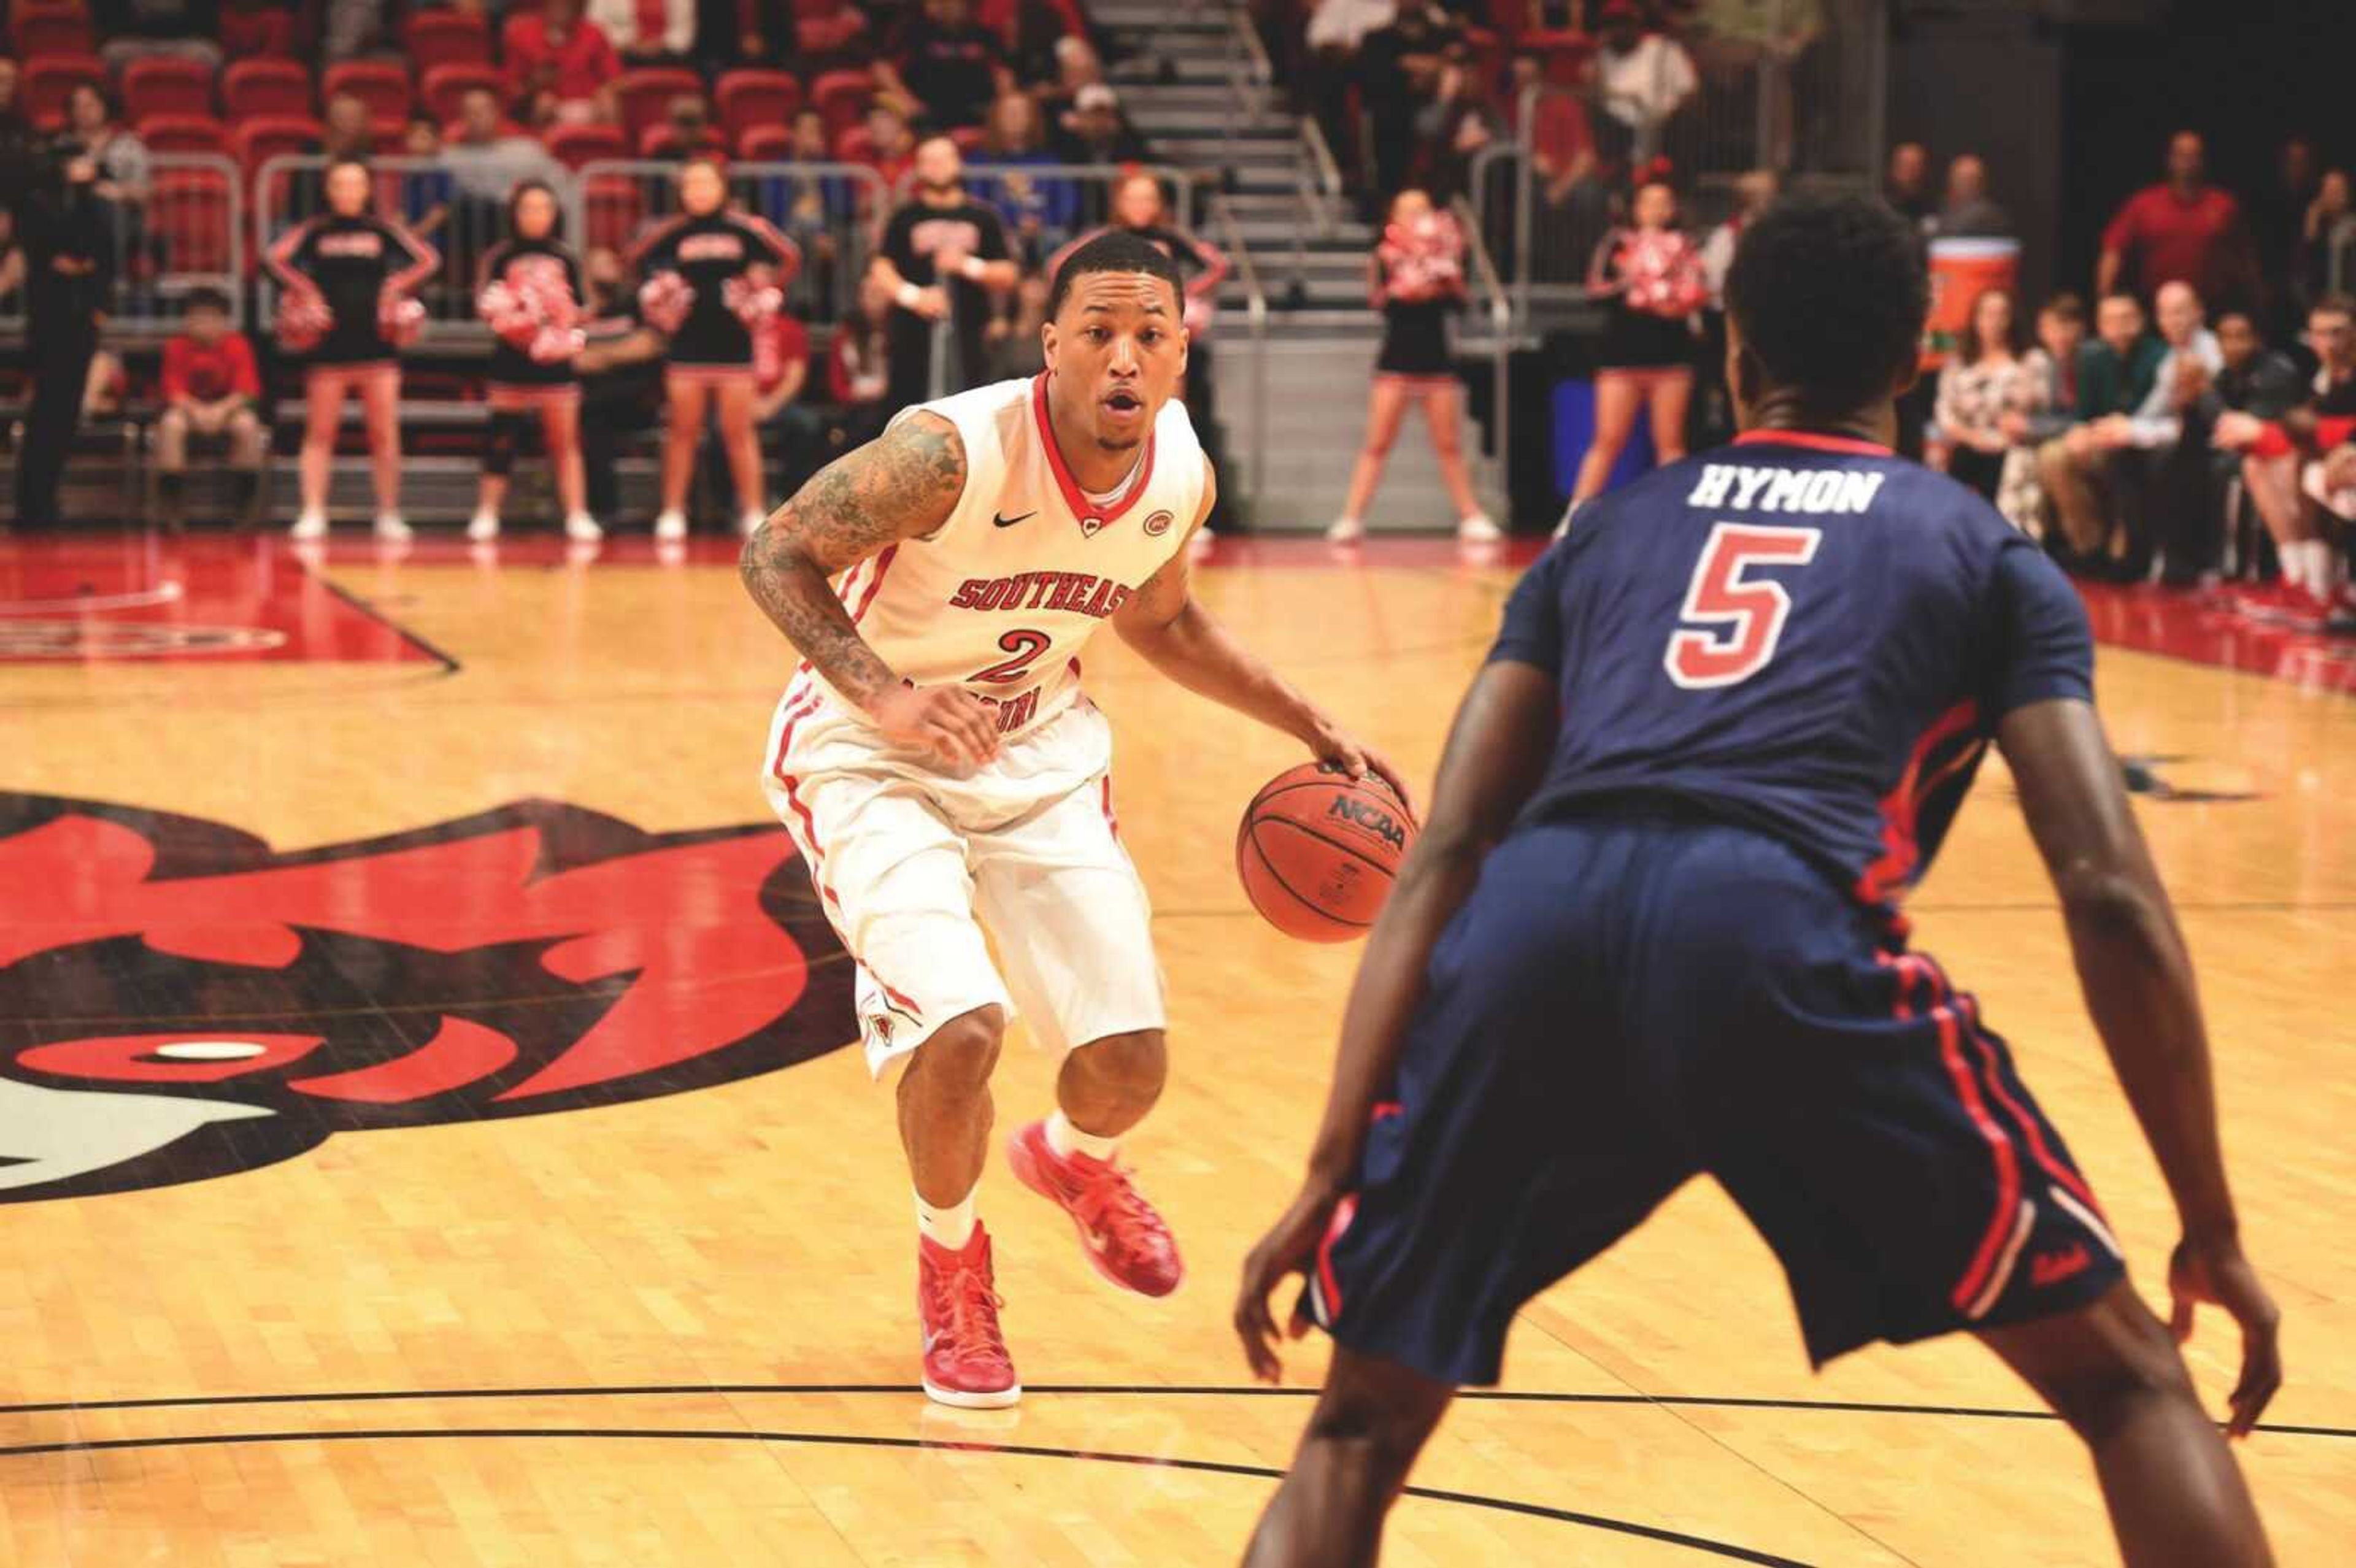 Former Southeast guard Isiah Jones dribbles toward a defender in the Redhawks' game against Ole Miss.